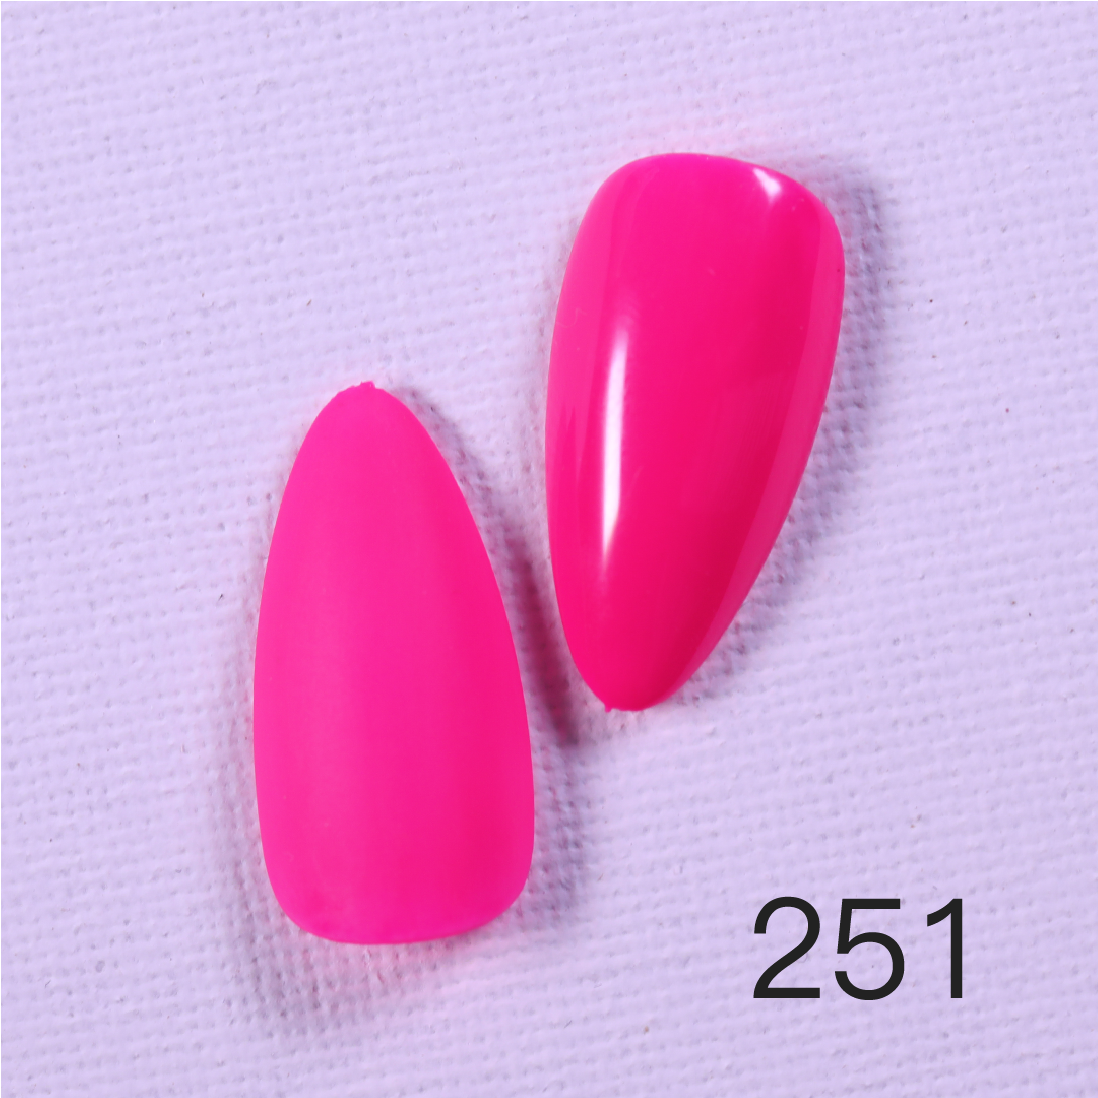 {{ GelPolish_USA }} {{ magnetic_gelpolish}} 251 {{ Gelpolish_usa}} {{ Gel_polish}} Mela Mela Gel Polish Colour - 80 colors available to choose from - {{ UV_Drying_machine}} - {{ Powerful_LED_Nail_Dryer}} {{ Gelish }} {{Gel_nail_polish}} {{ Orly}}